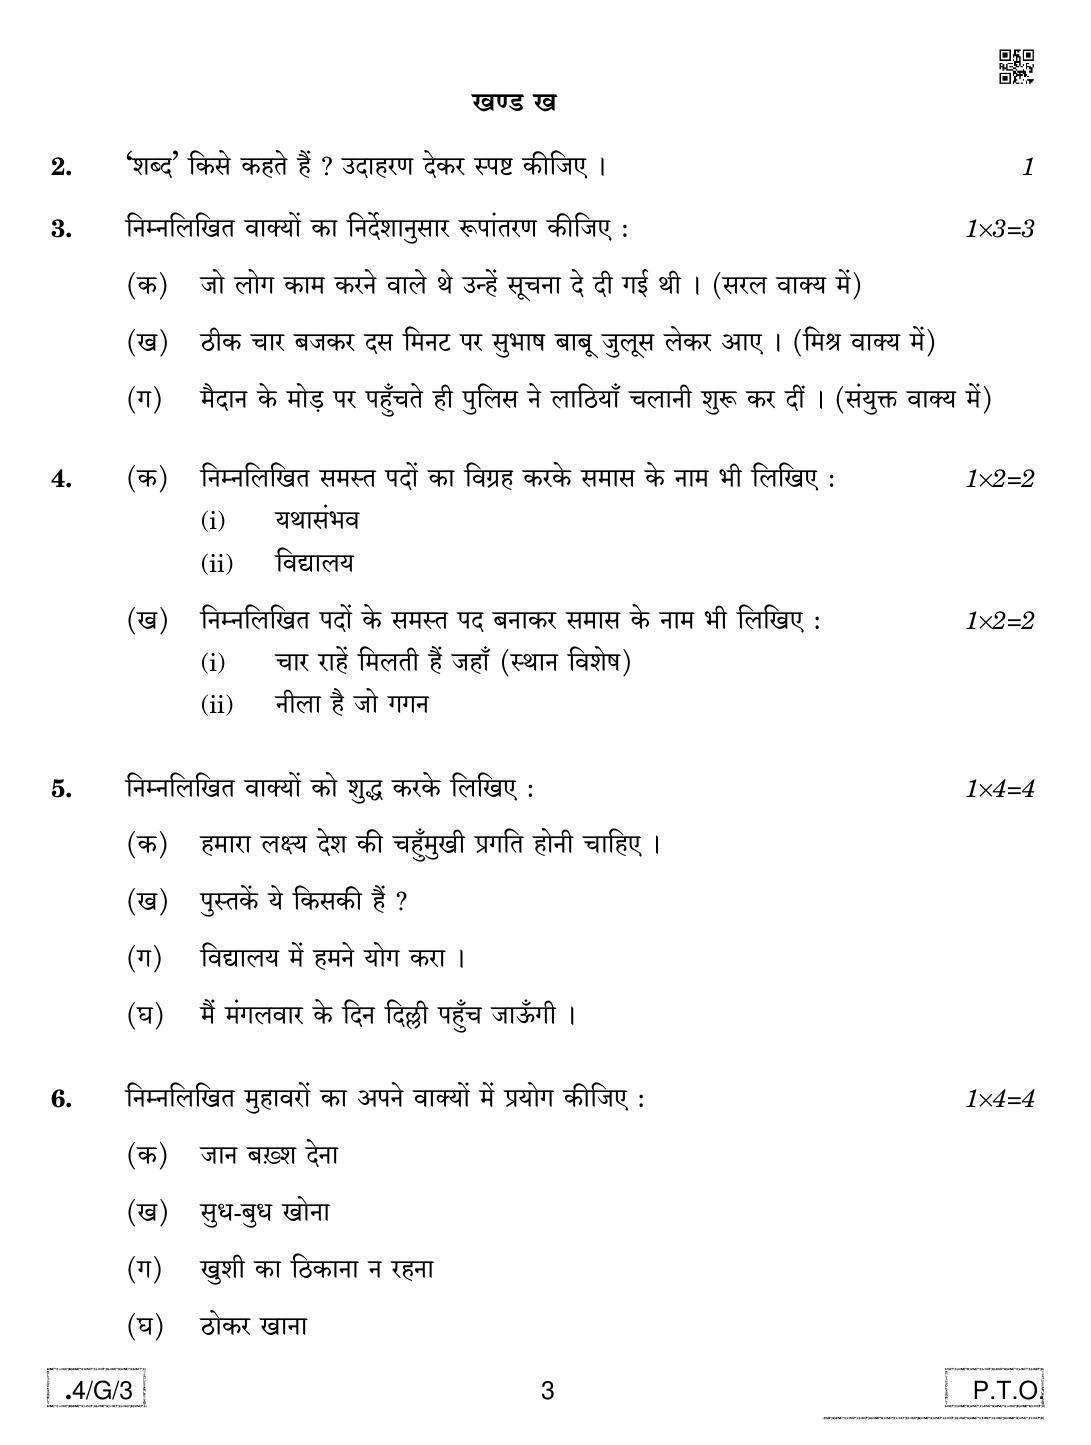 CBSE Class 10 4-C-3 Hindi B 2020 Compartment Question Paper - Page 3